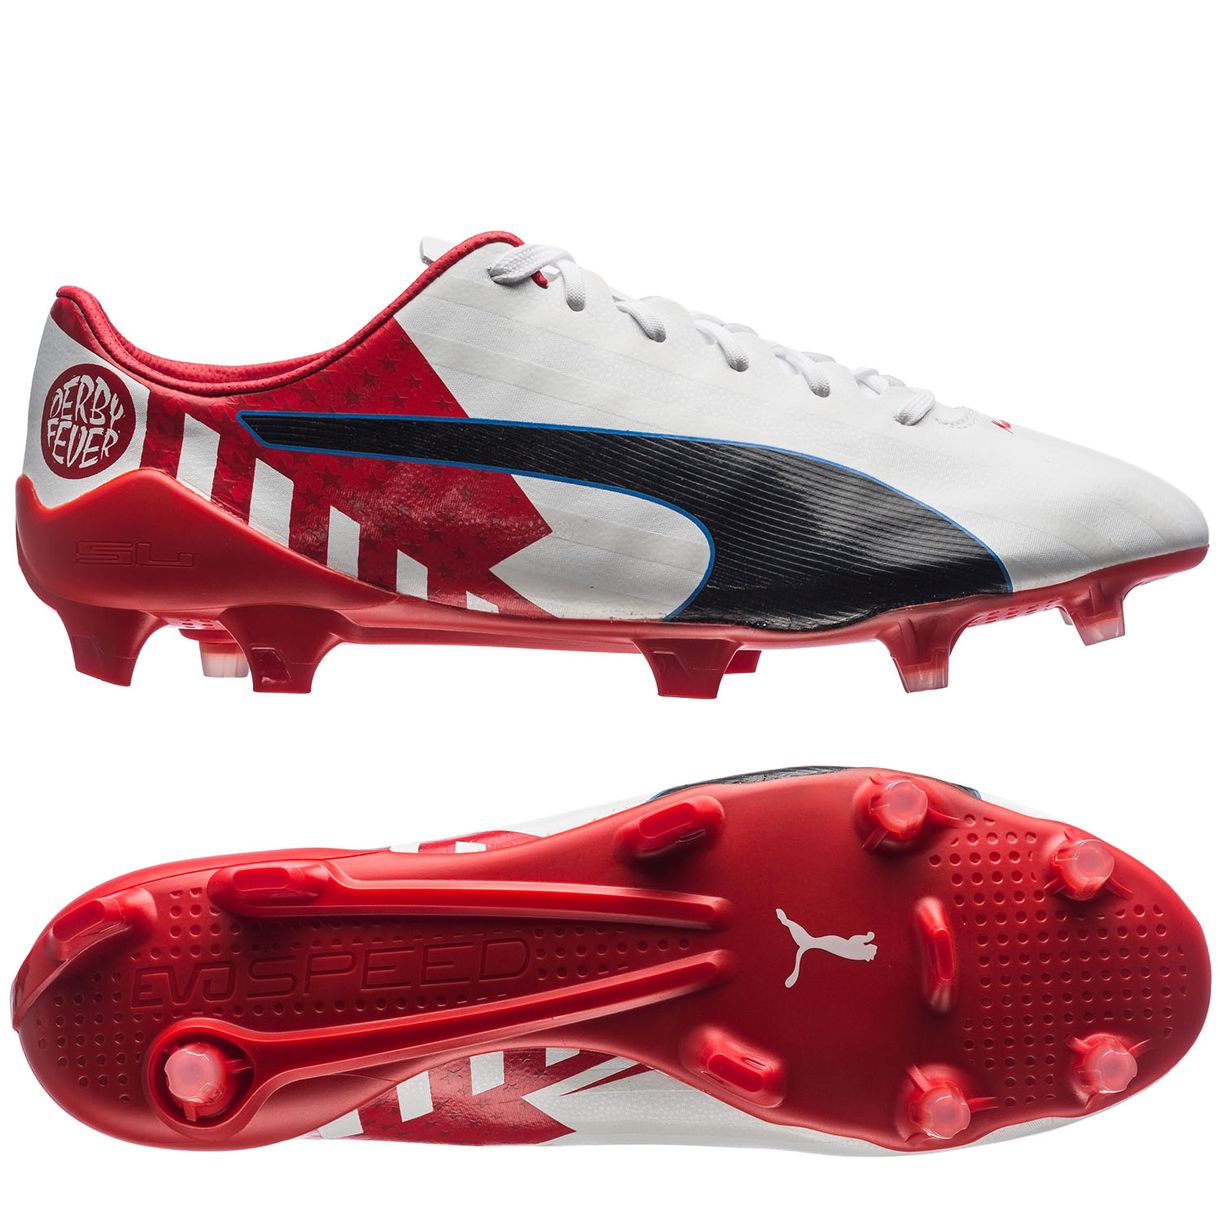 Observar Scully Manifiesto Puma evoSPEED 17 SL-S FG Derby Fever Griezmann - High Risk Red / Puma White  - Football Shirt Culture - Latest Football Kit News and More